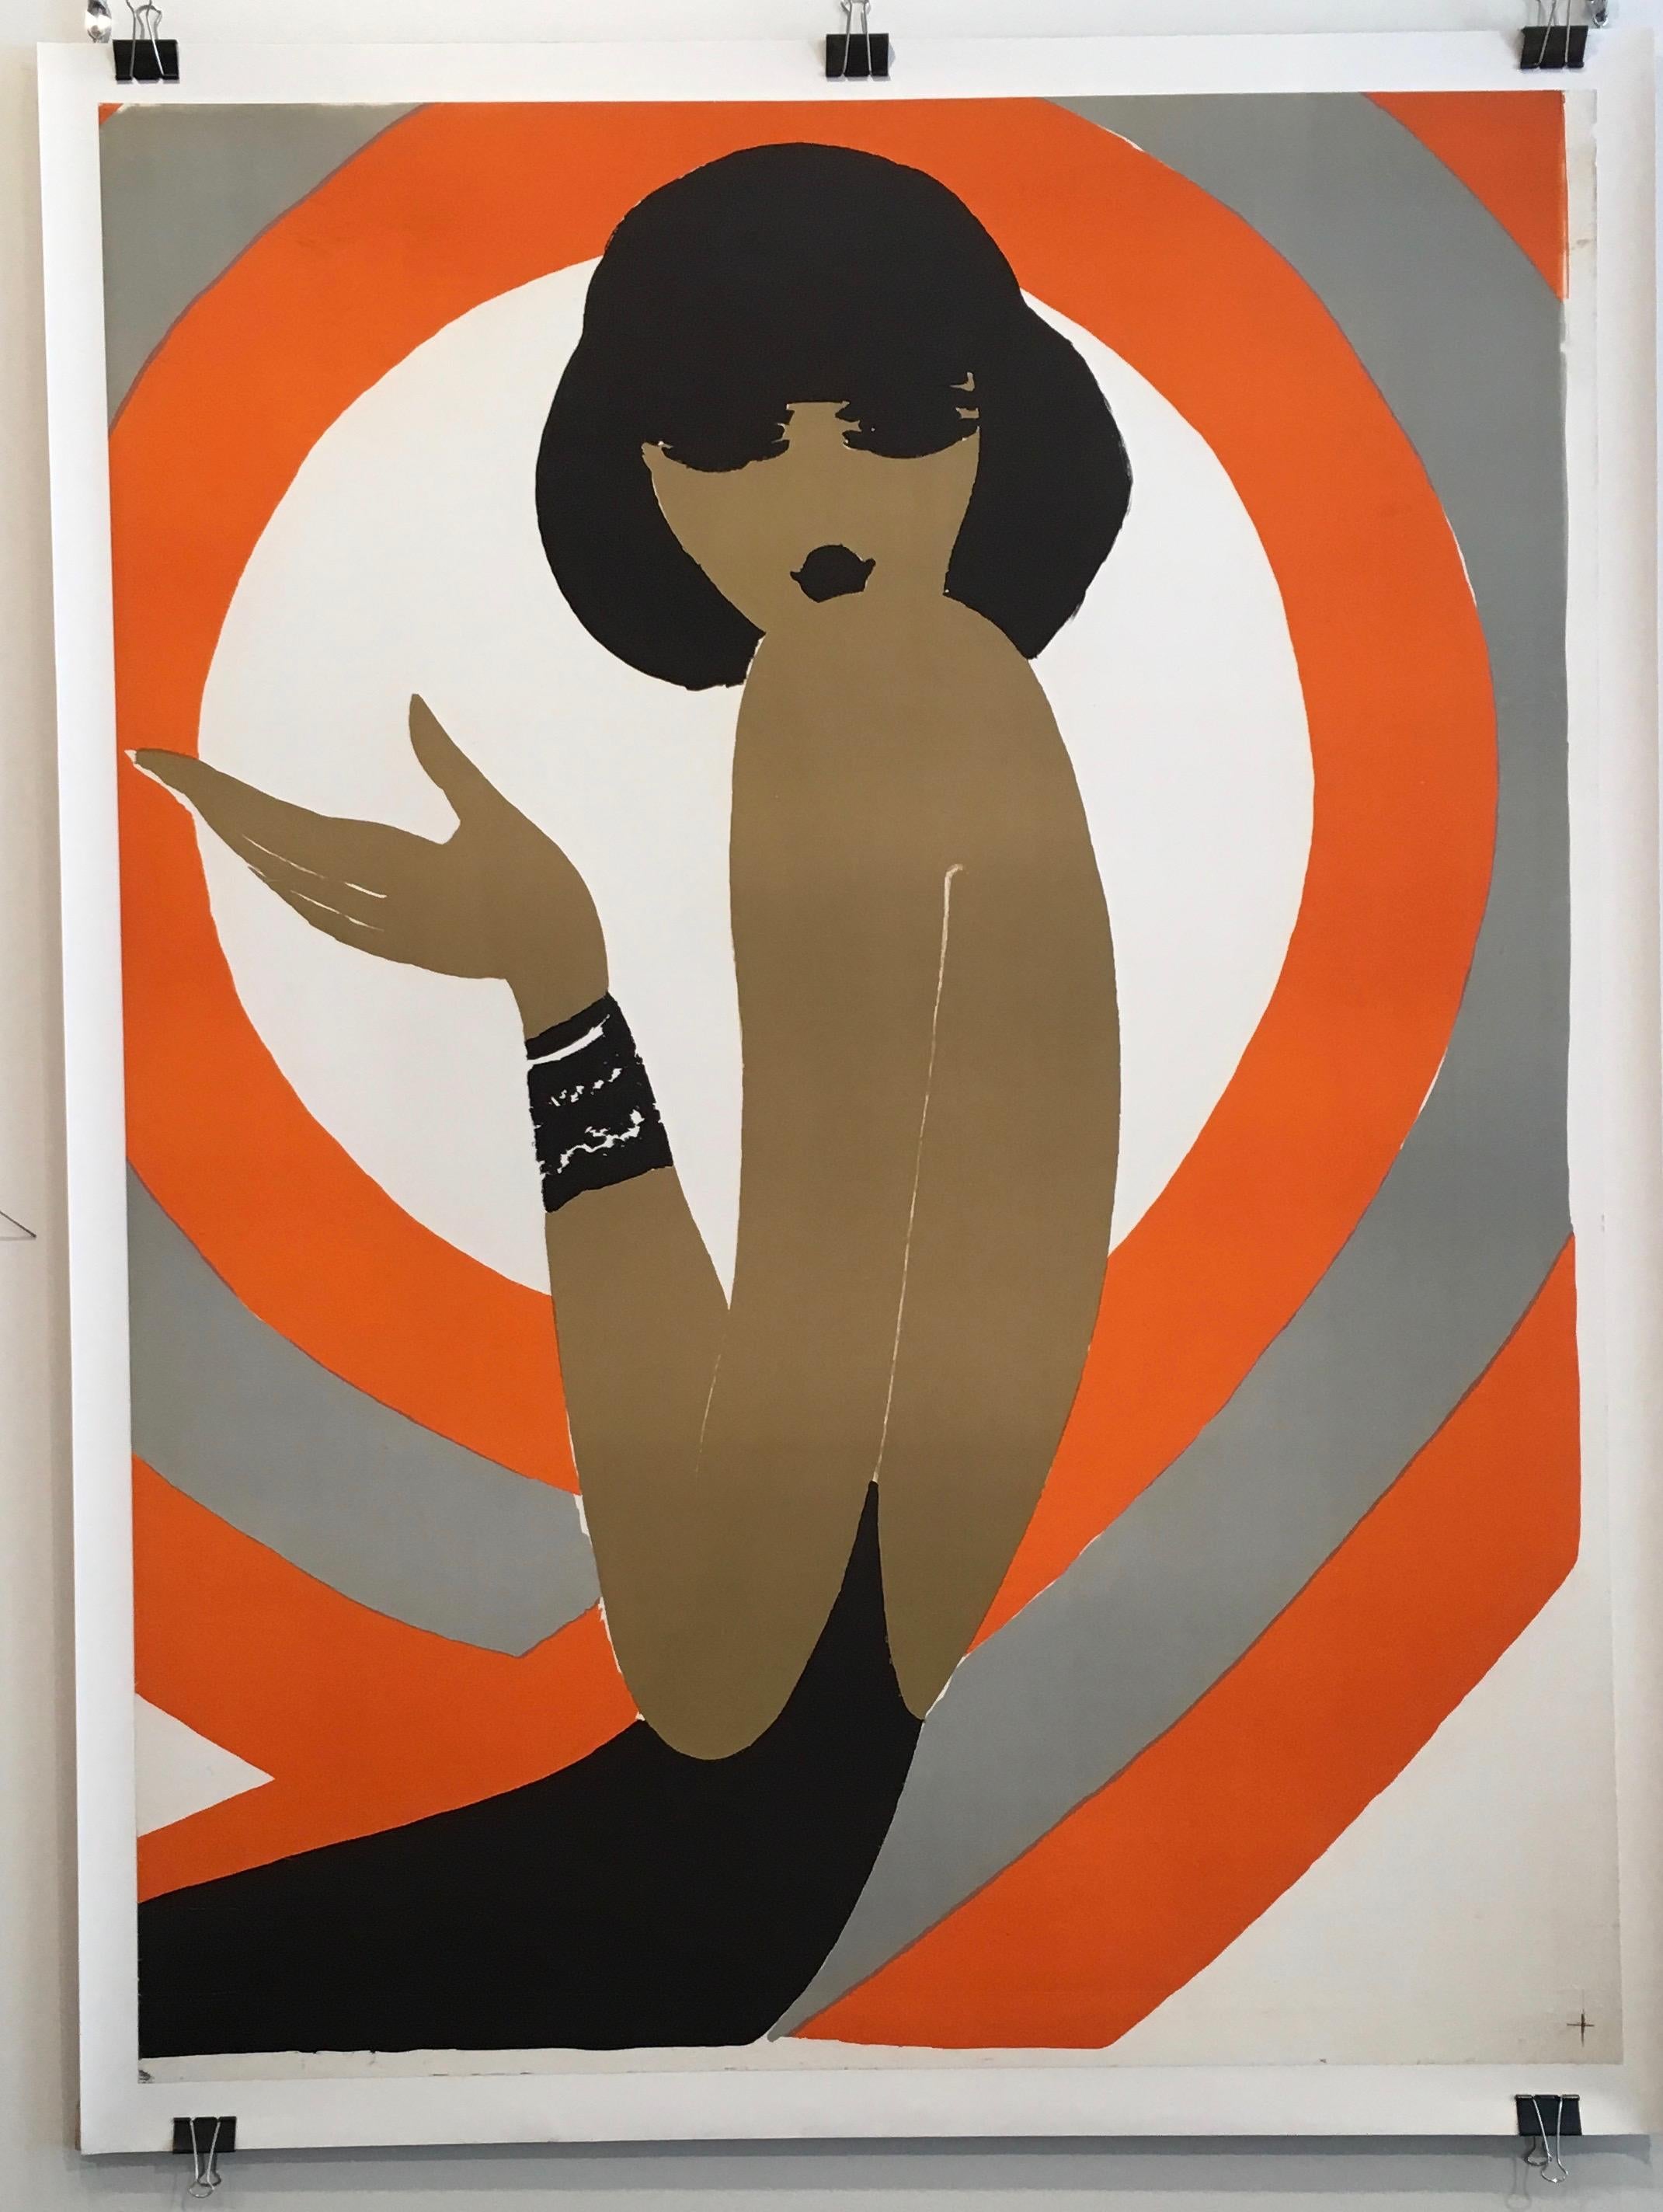 French original vintage fashion poster by Villemot 'Spirale Orange 1970'

This is an original vintage lithograph poster by Villemot advertising the French fashion department store, 'Parly 2' in Paris. This poster is the epitome of elegance,